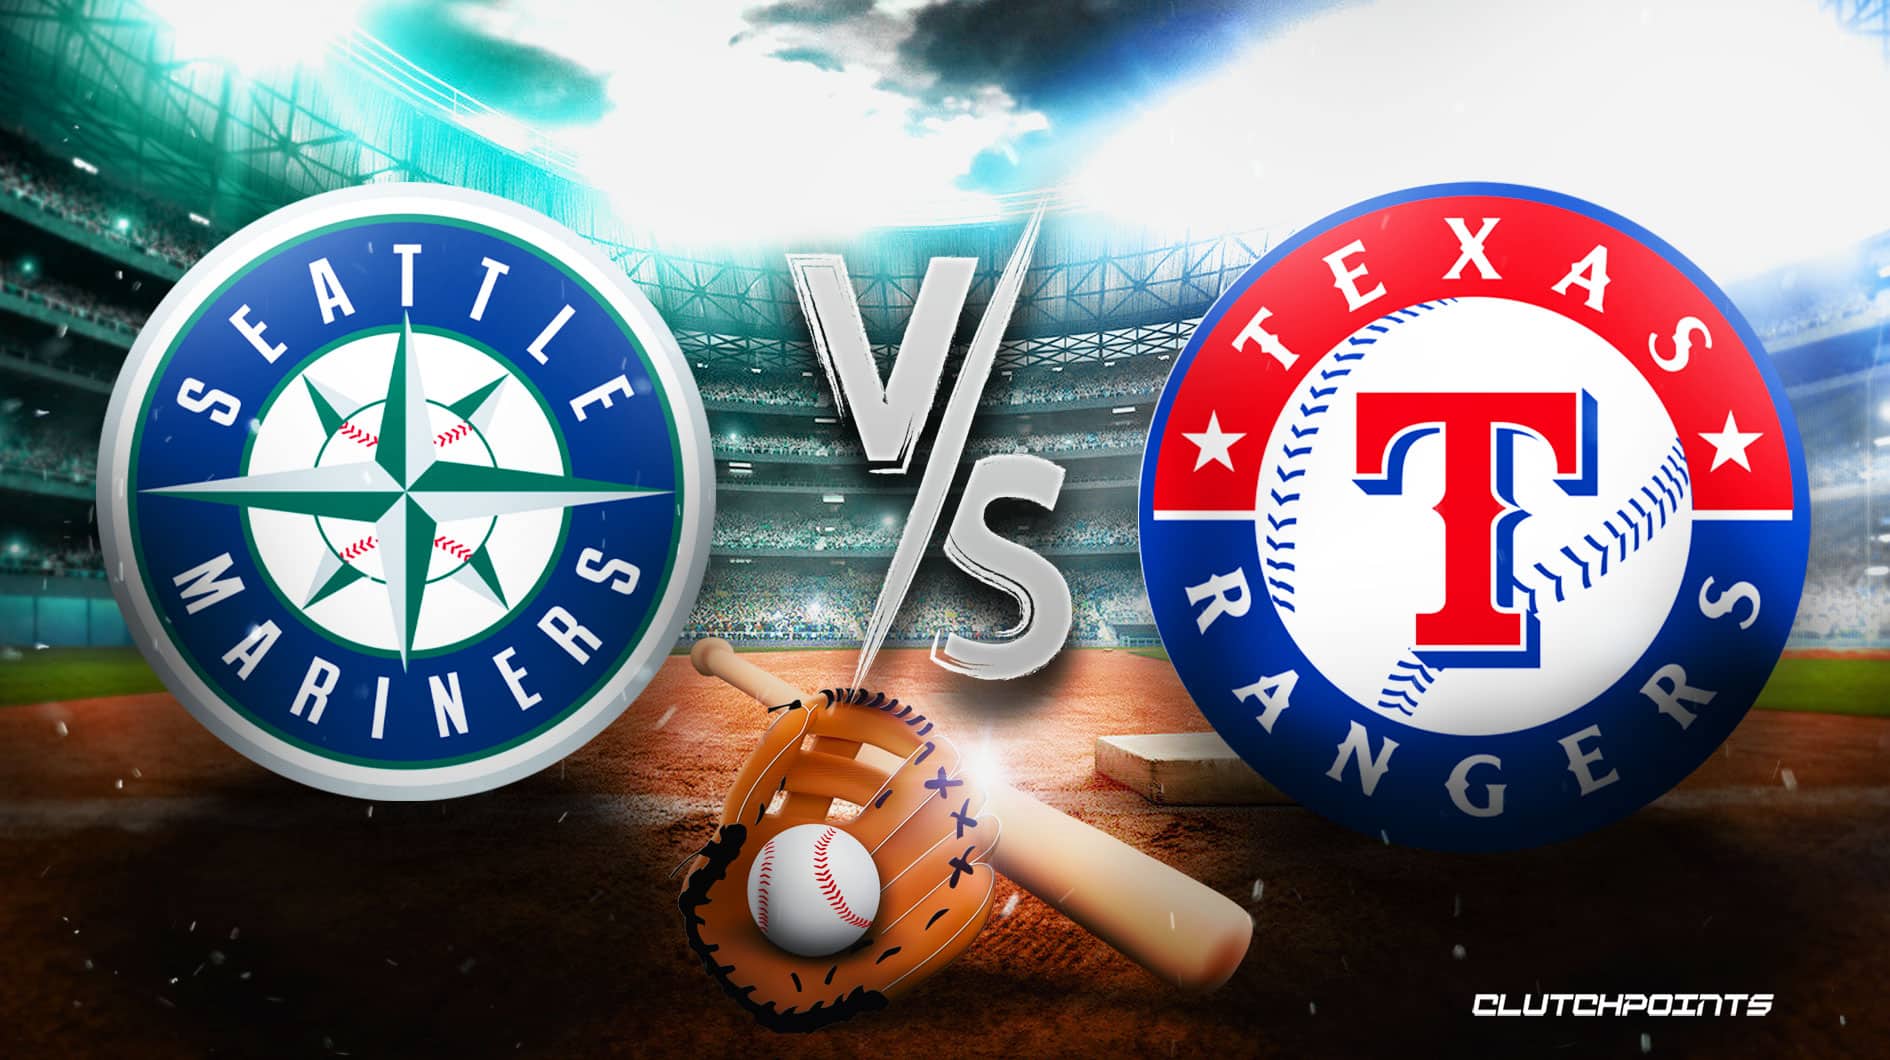 How to Watch the Mariners vs. Rangers Game: Streaming & TV Info